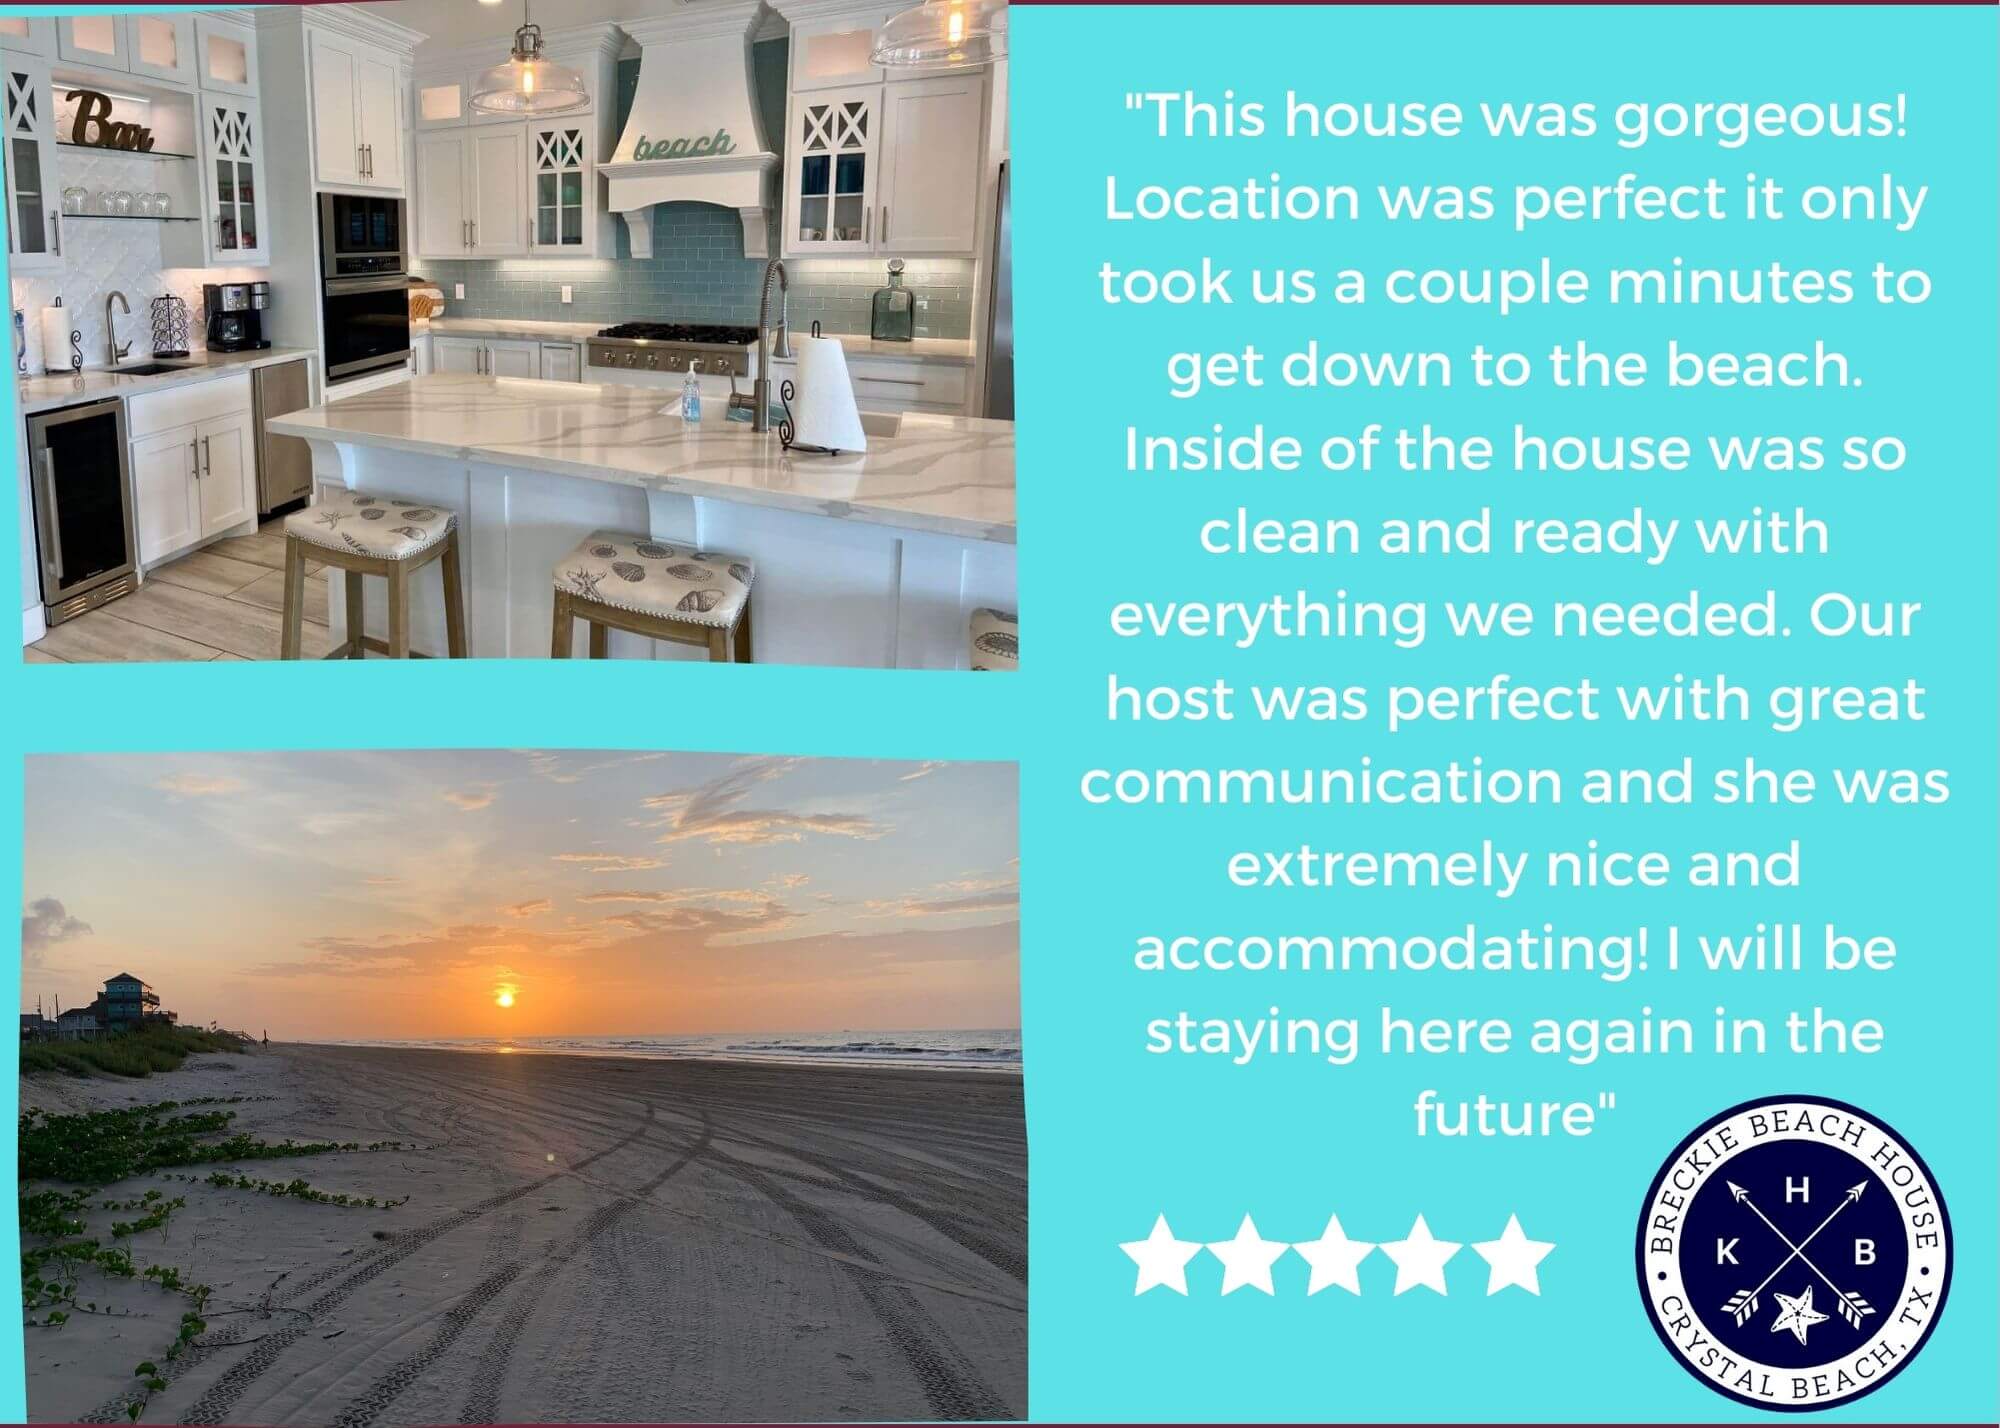 5 Star Review of a KHB Vacation Rentals Breckie Beach House guest with a picture of Crystal Beach, TX and Breckie Beach House